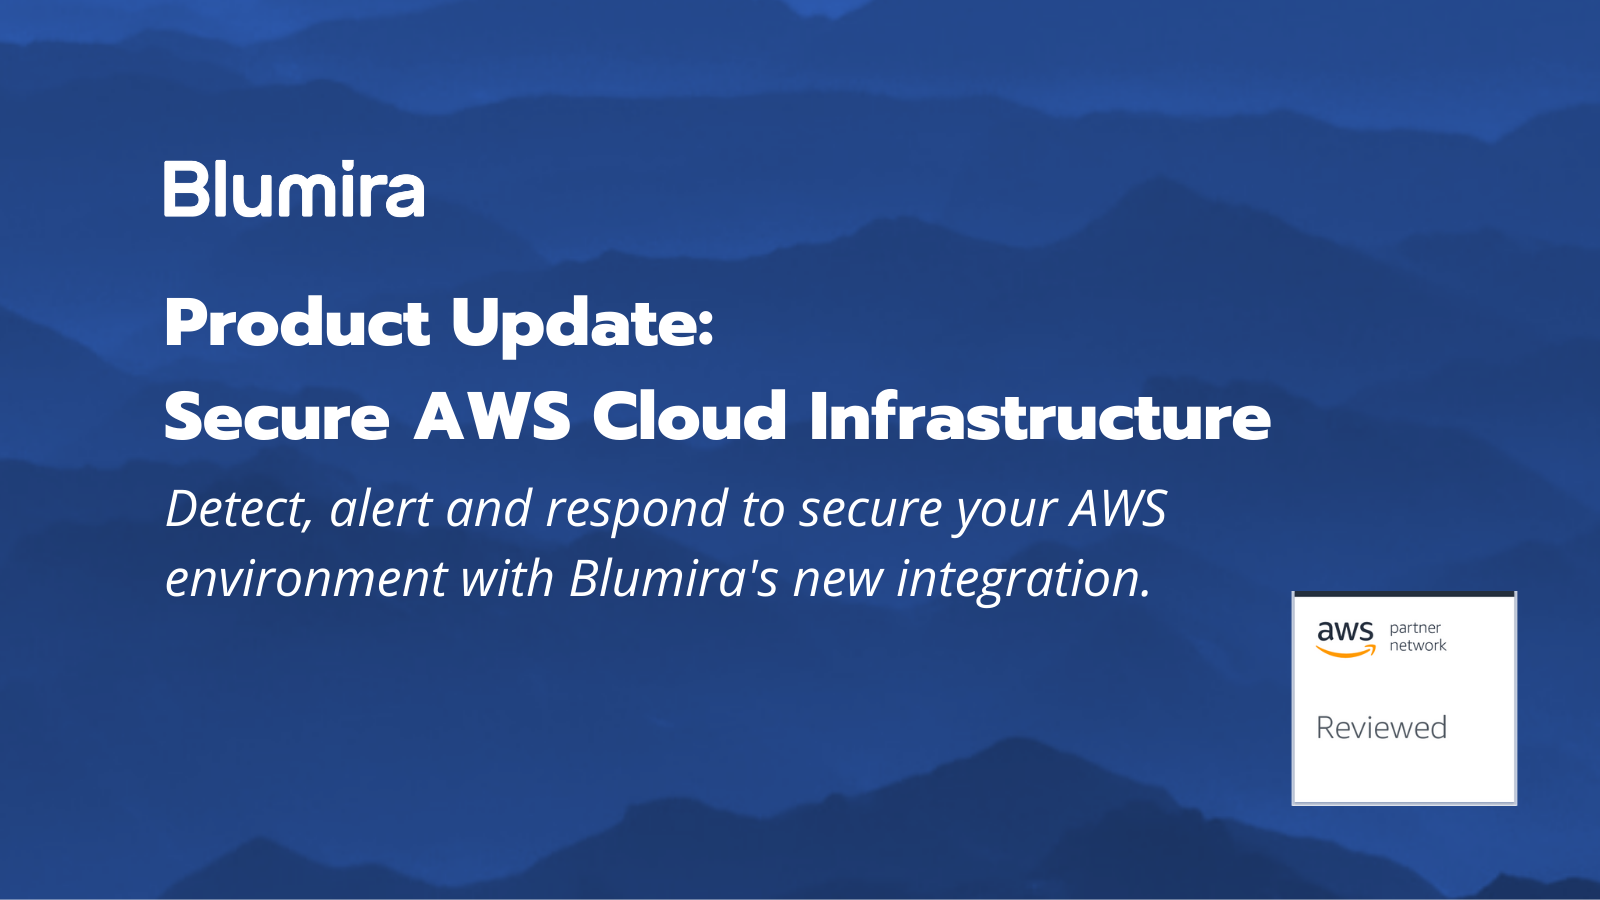 Product Update: Secure AWS Cloud Infrastructure With Blumira